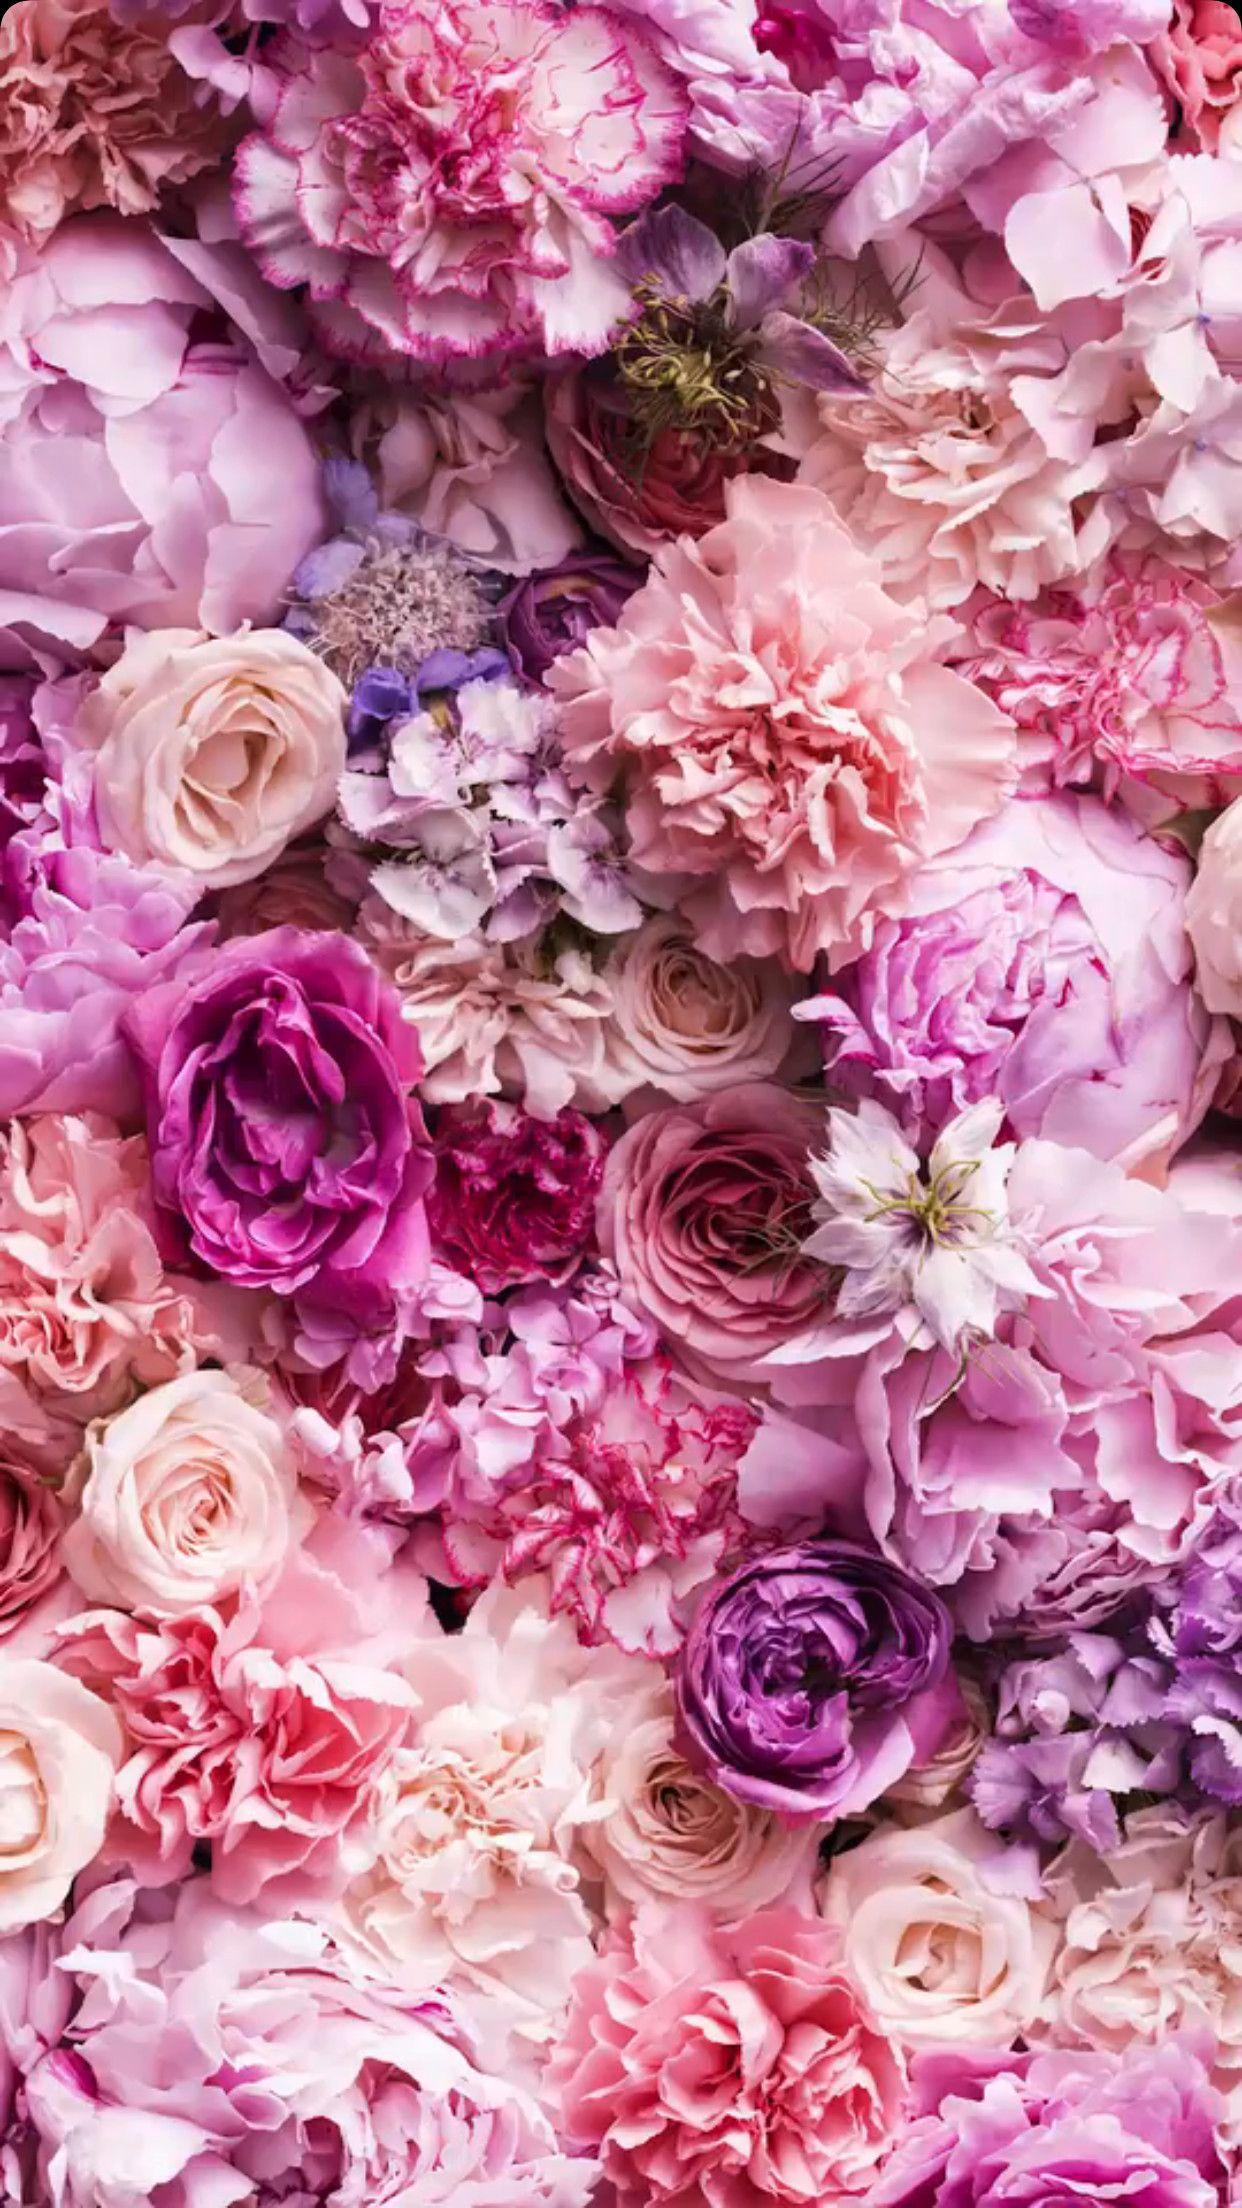 Pink Floral iPhone Wallpapers - Top Free Pink Floral iPhone Backgrounds